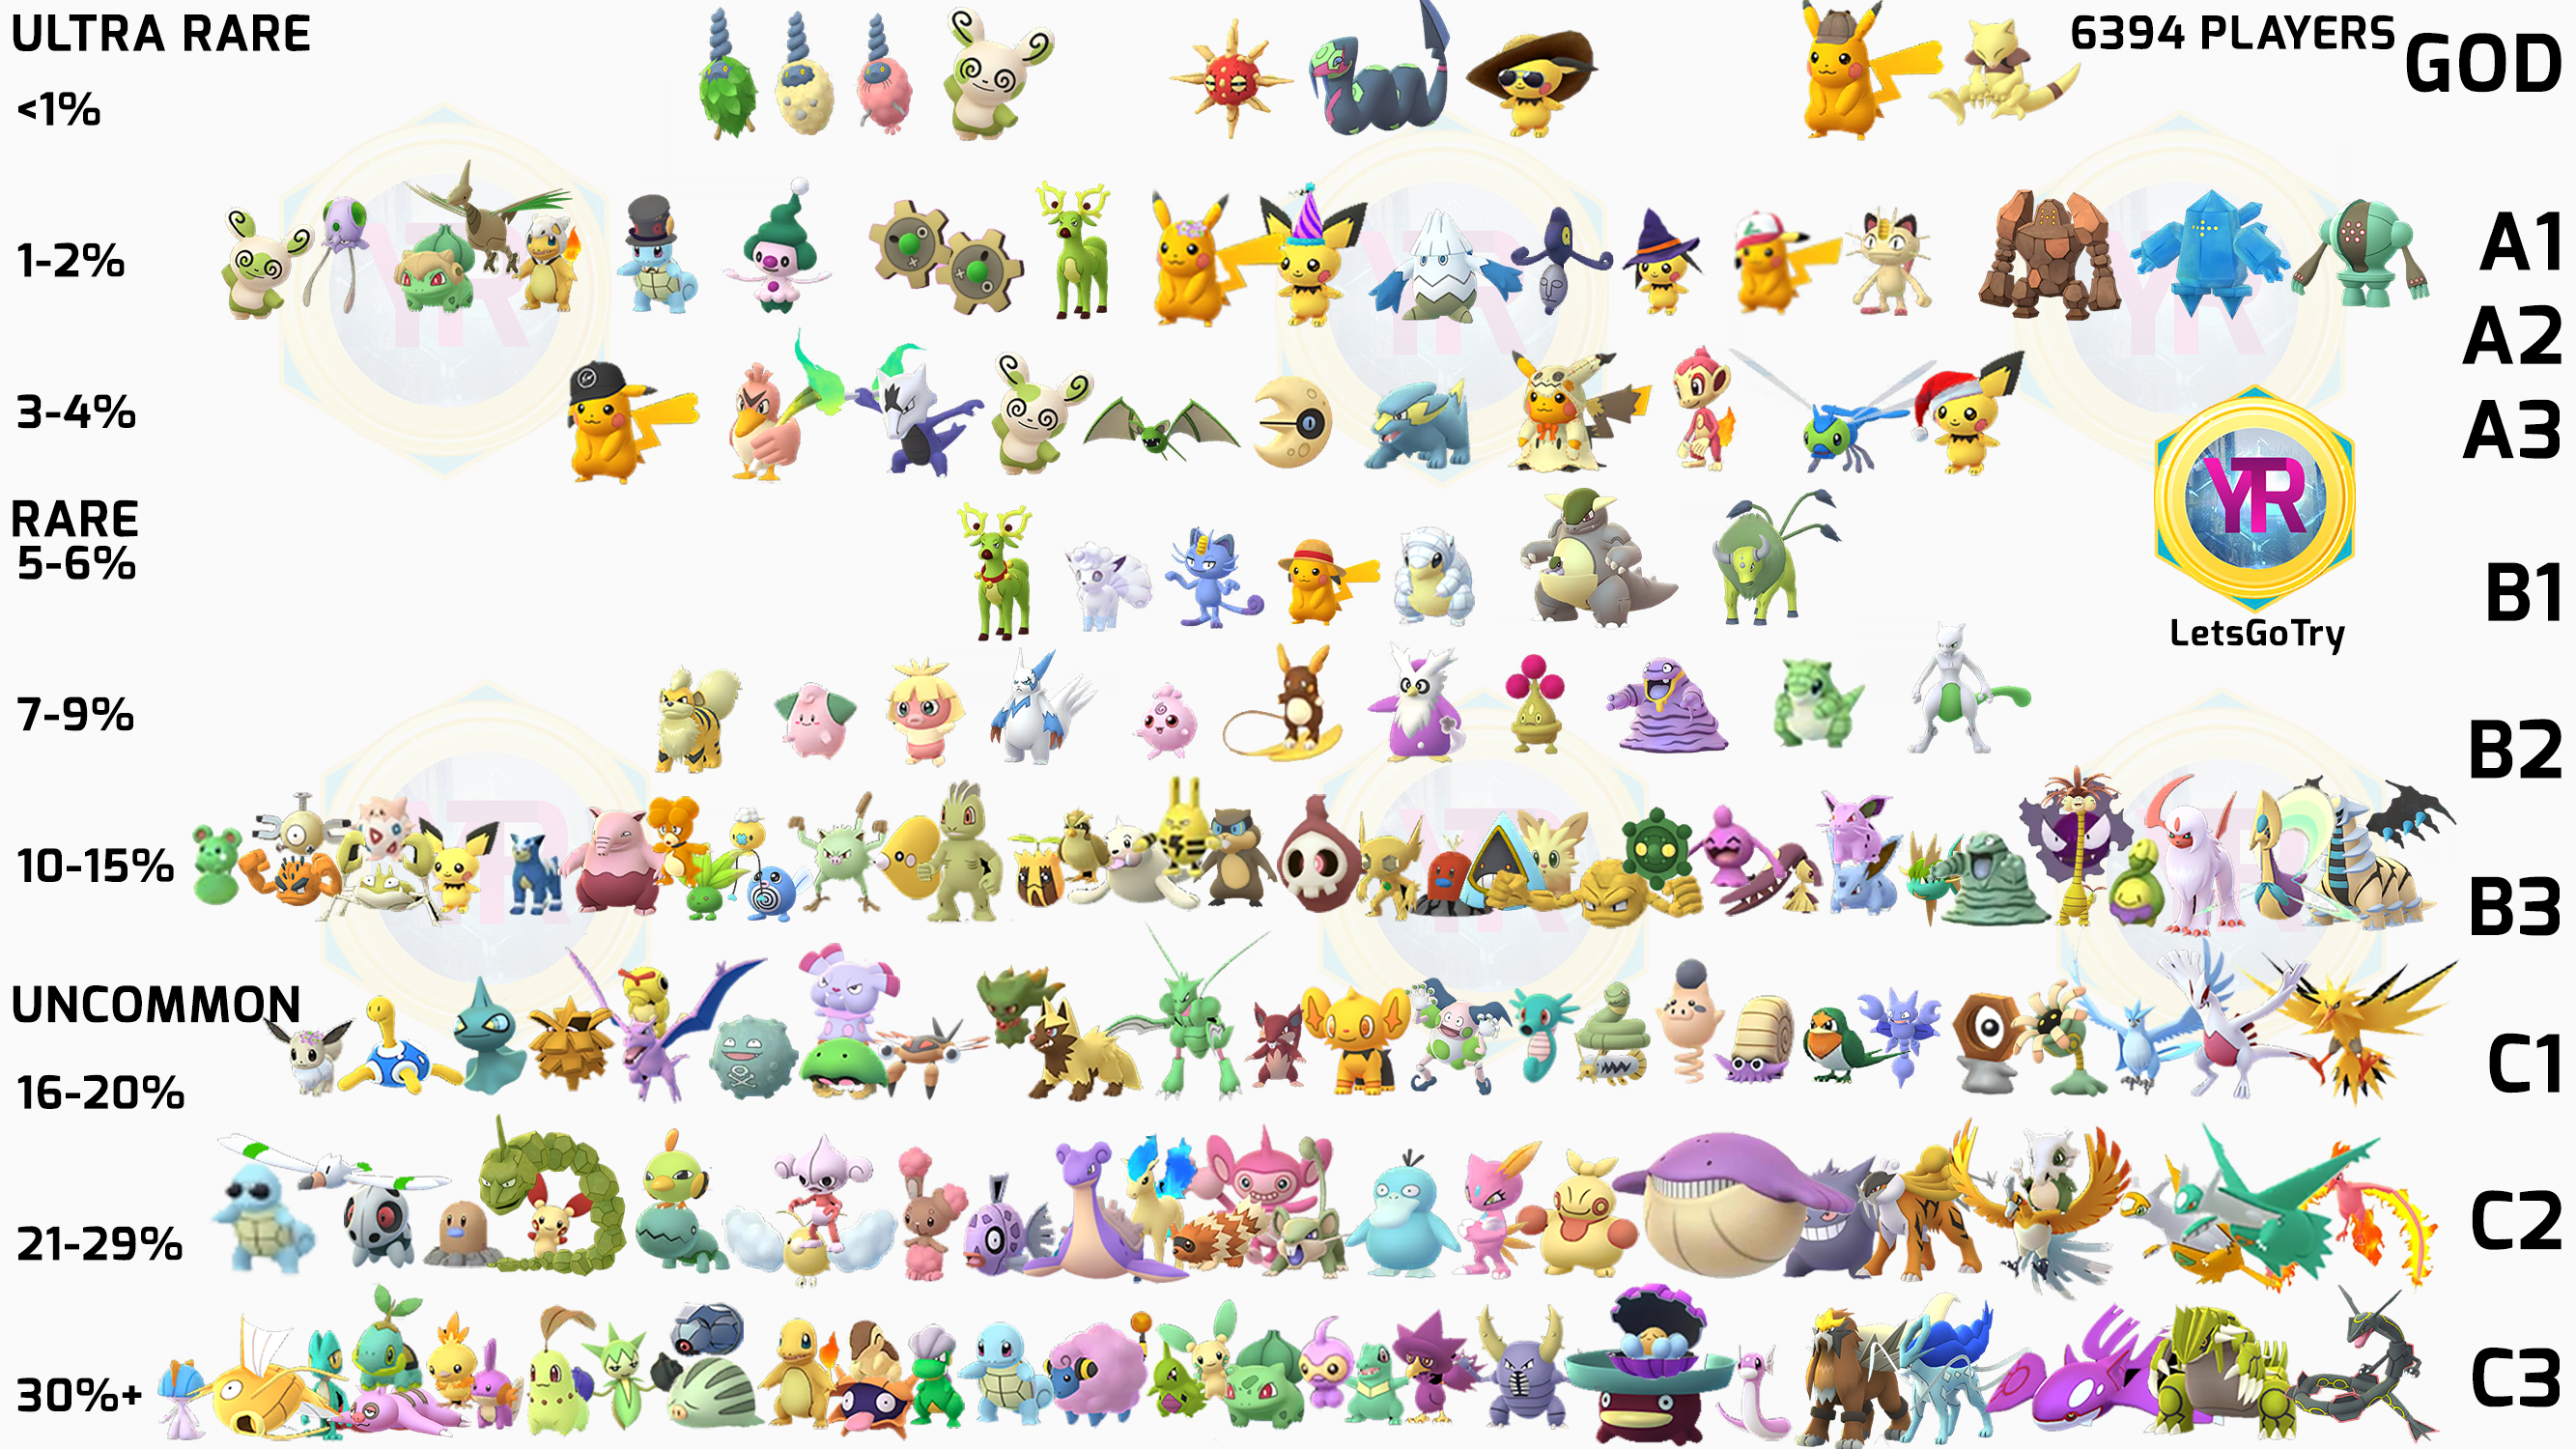 Letsgotry New Shiny List For May Will Be Available Tomorrow At 4p M Gmt 2 Pay Attention To Regional Shiny Pokemon On The List This List Will Be Mostly From Polish Players